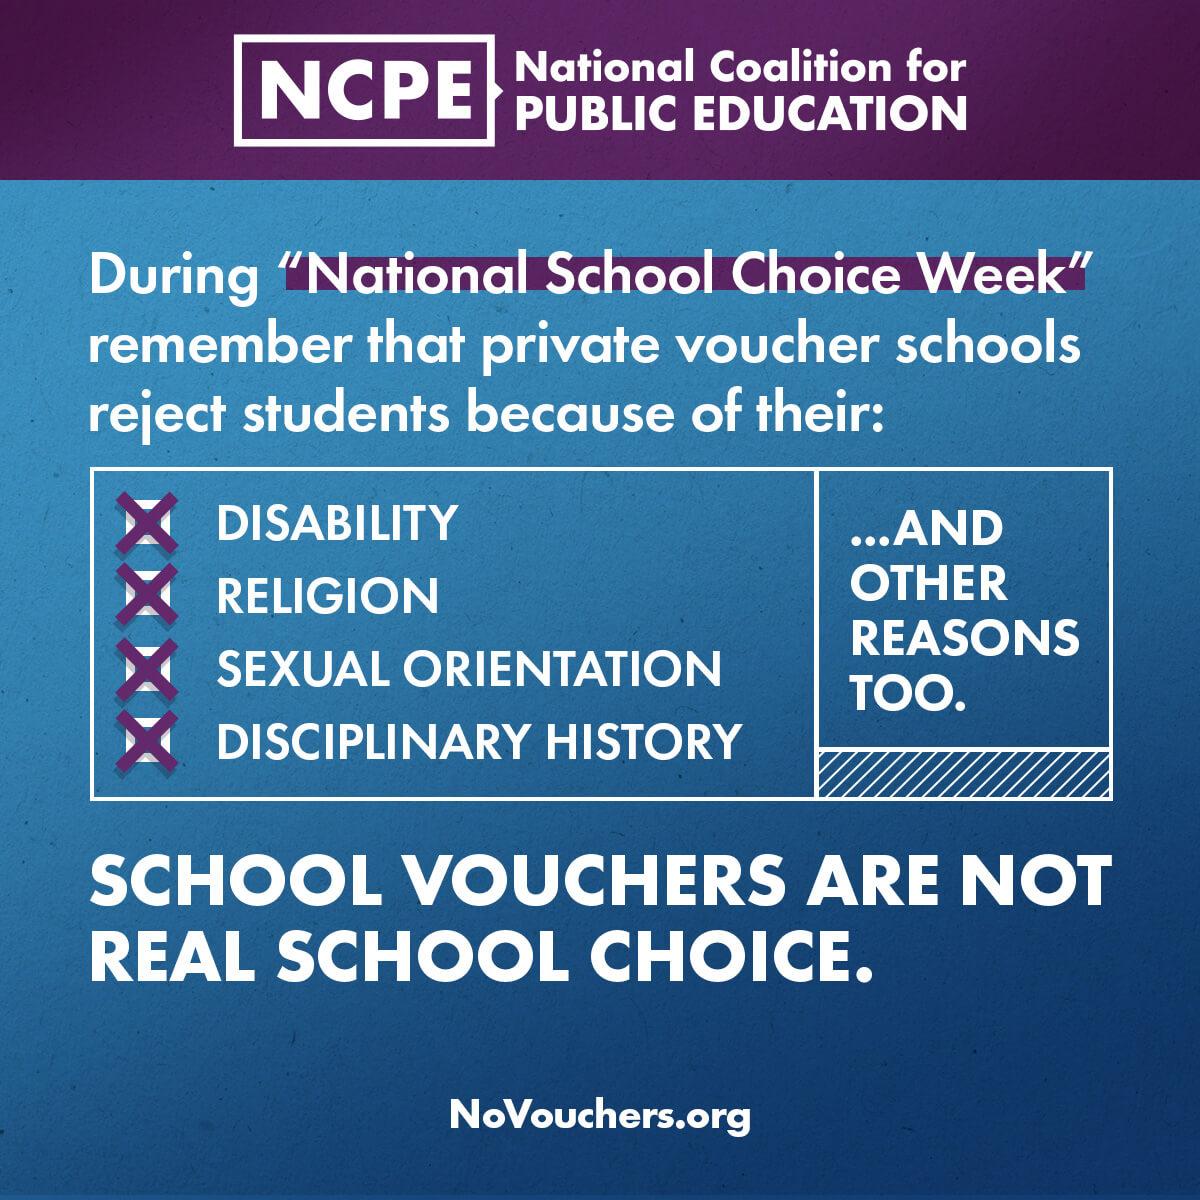 Remember that private voucher schools reject students for many reasons. School vouchers are not real choice.